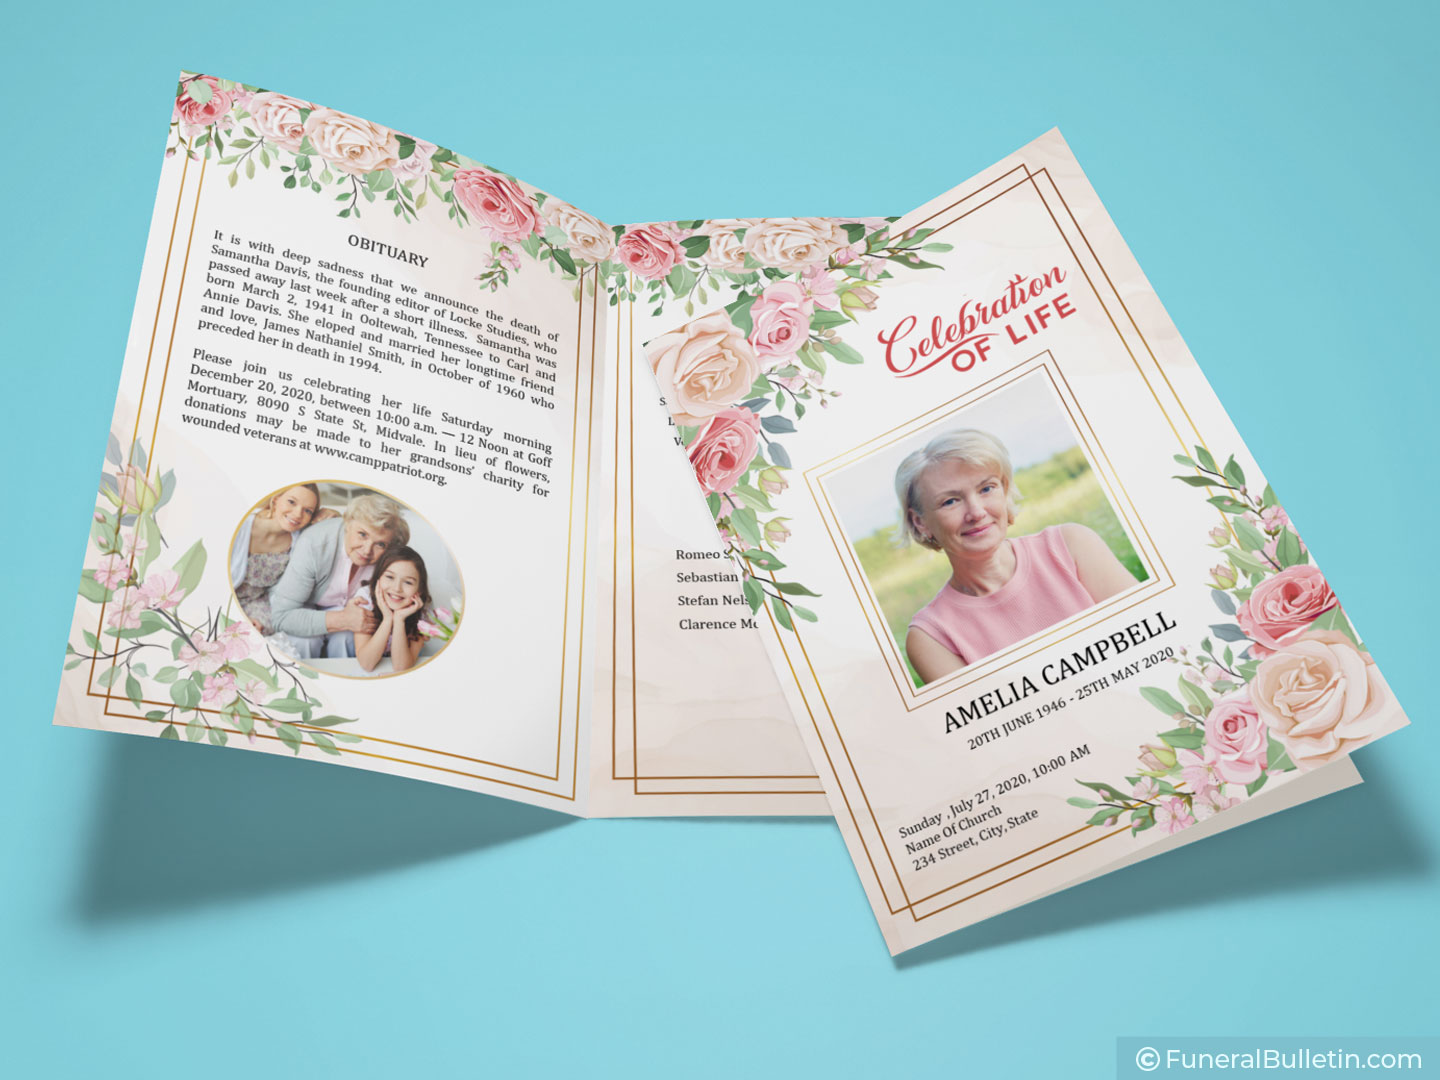 Celebration Of Life Program Template With Roses Design Download Now!